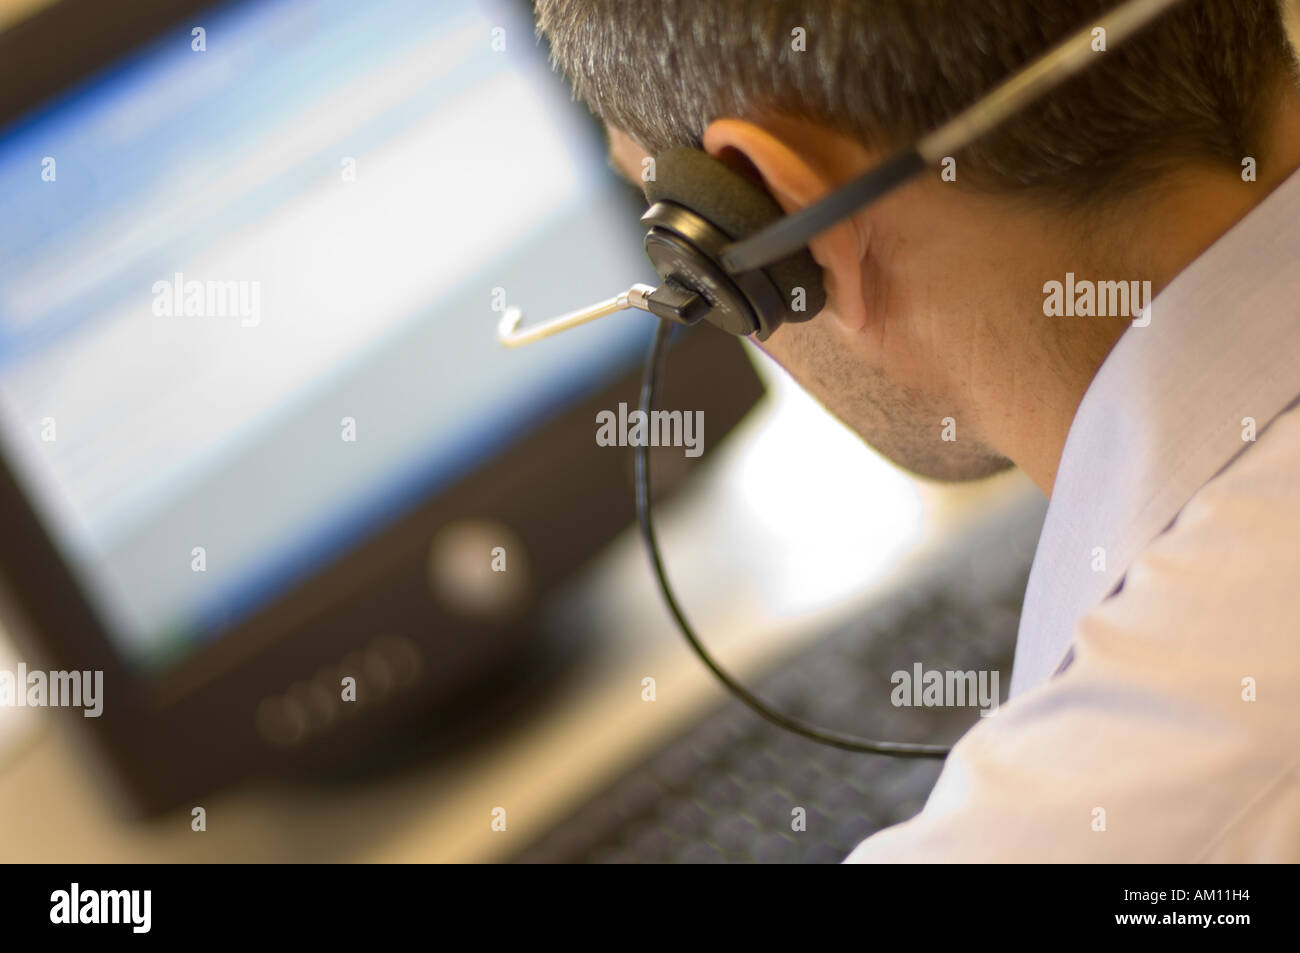 a man working in an office telemarketing computing helpline helpdesk support uk Stock Photo